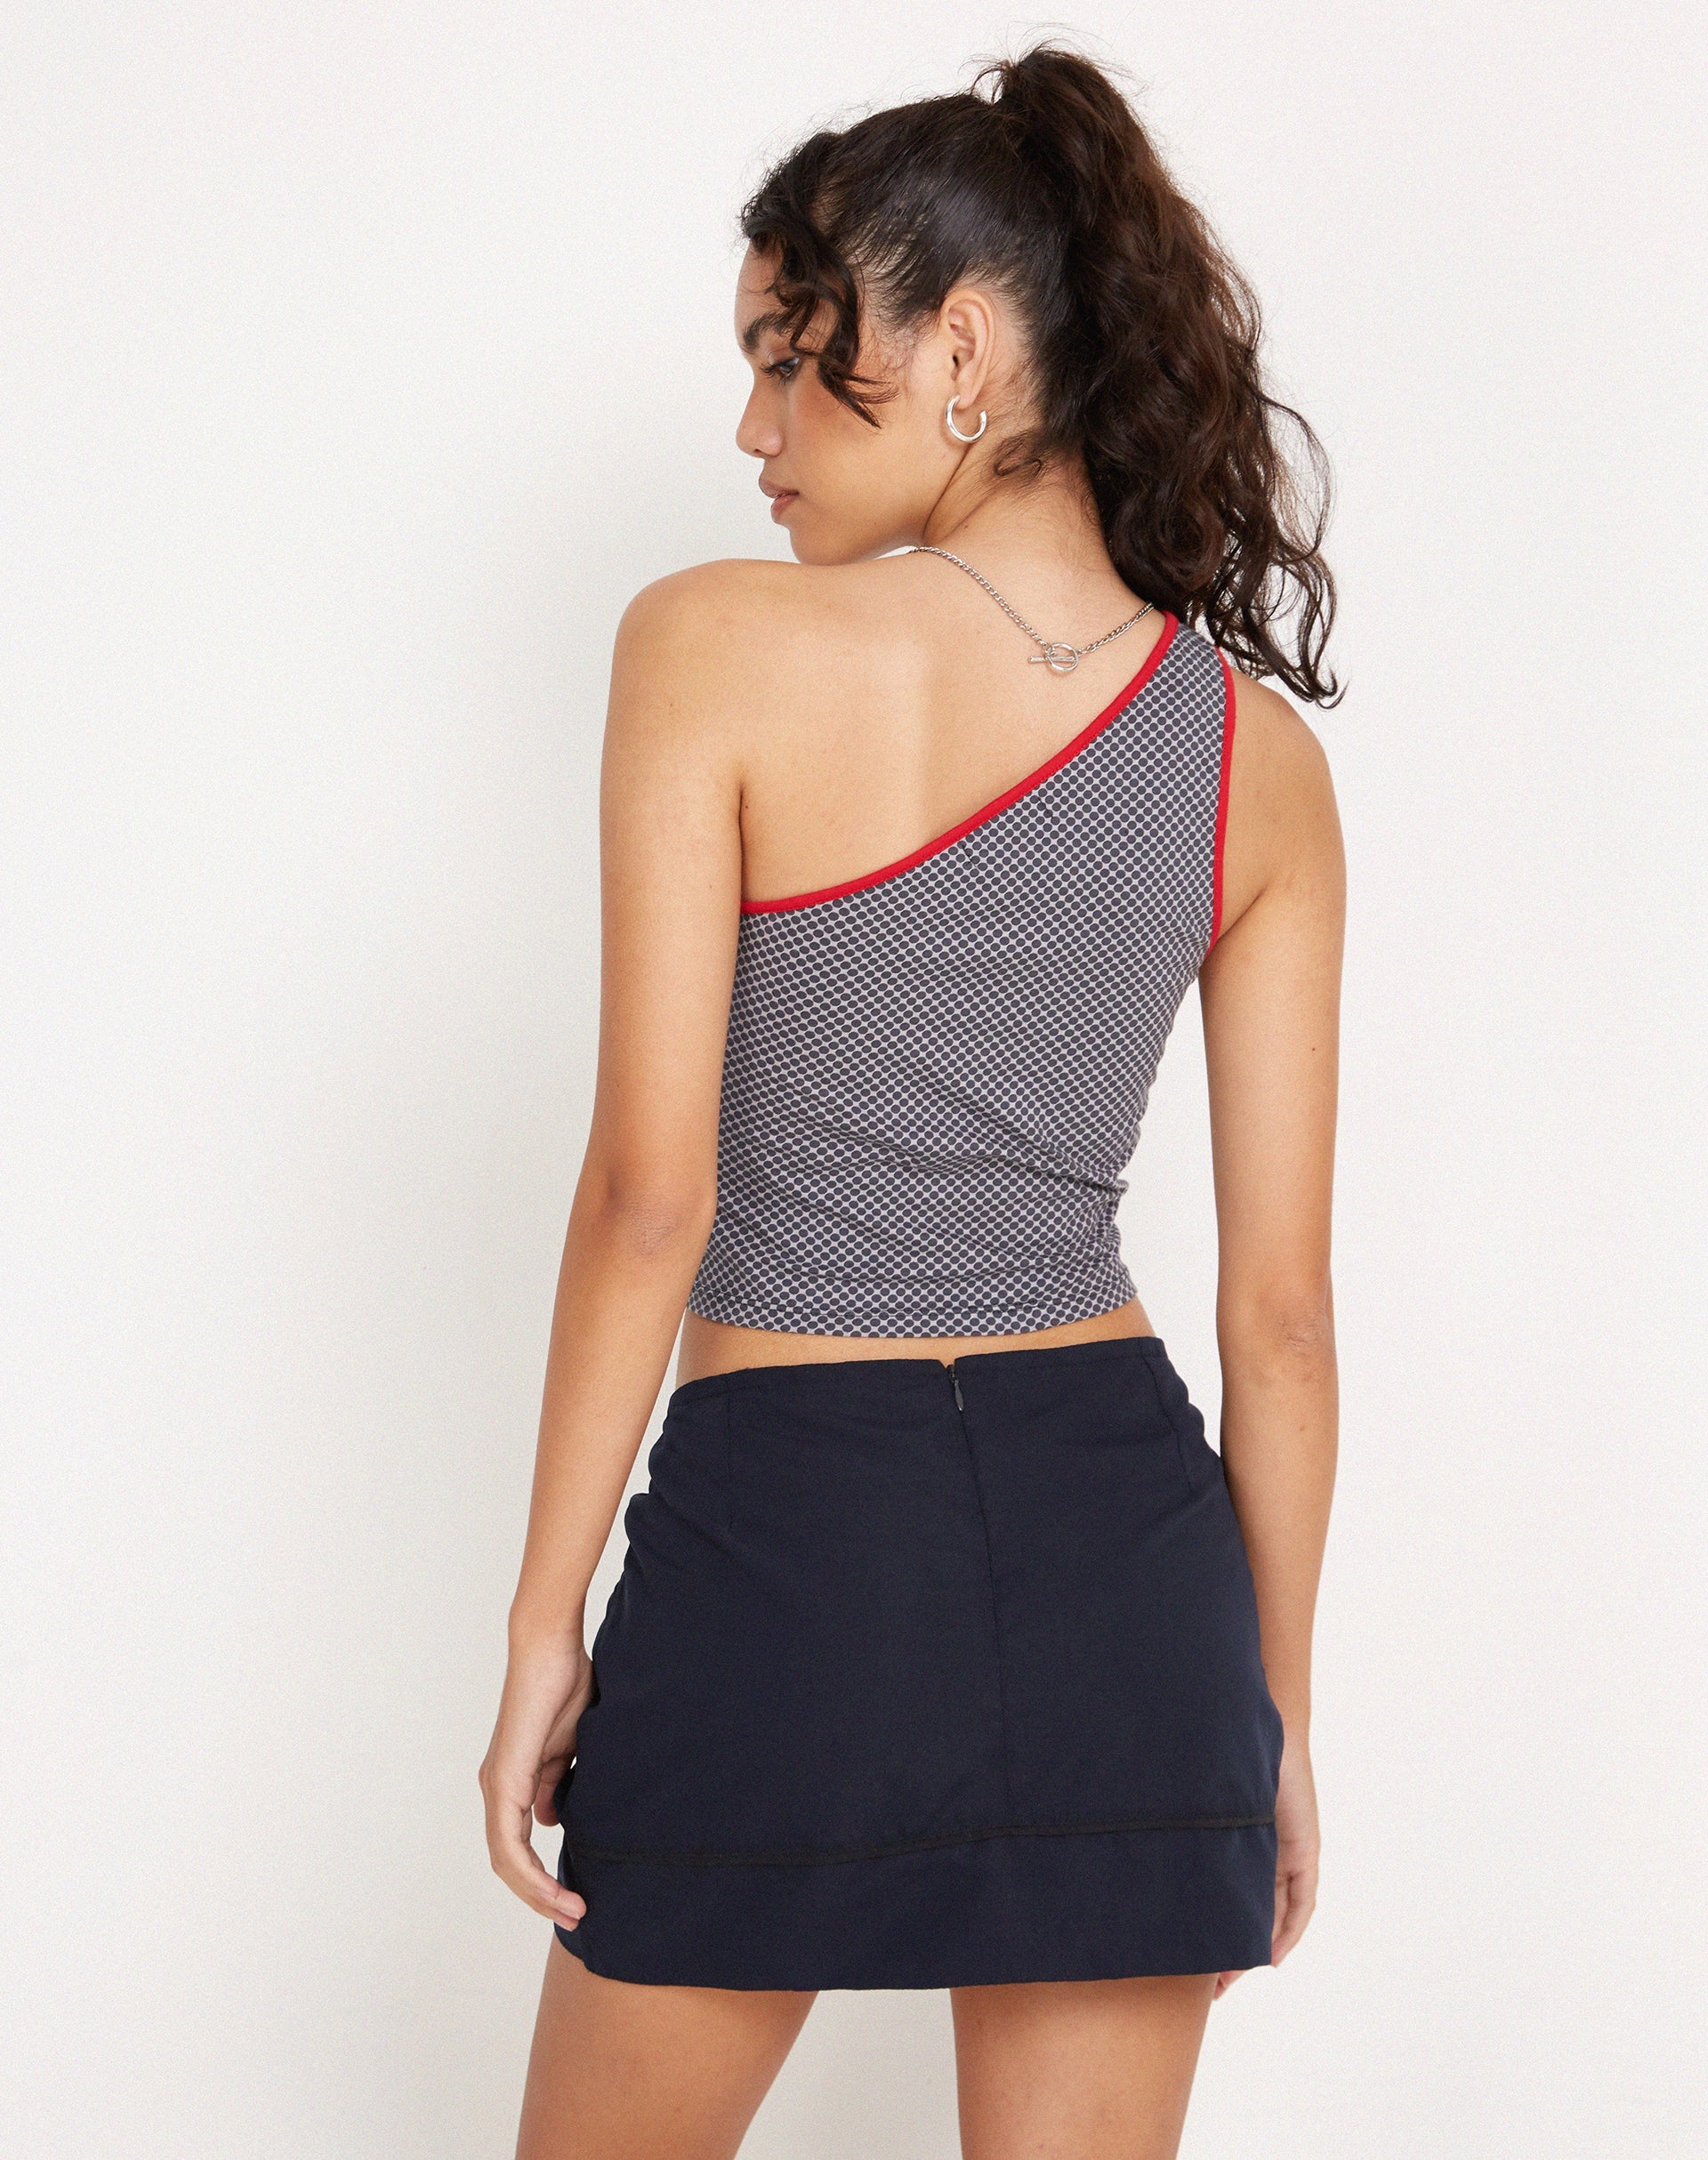 image of Baylor One Shoulder Top in Grey Red Sporty Micro Spot